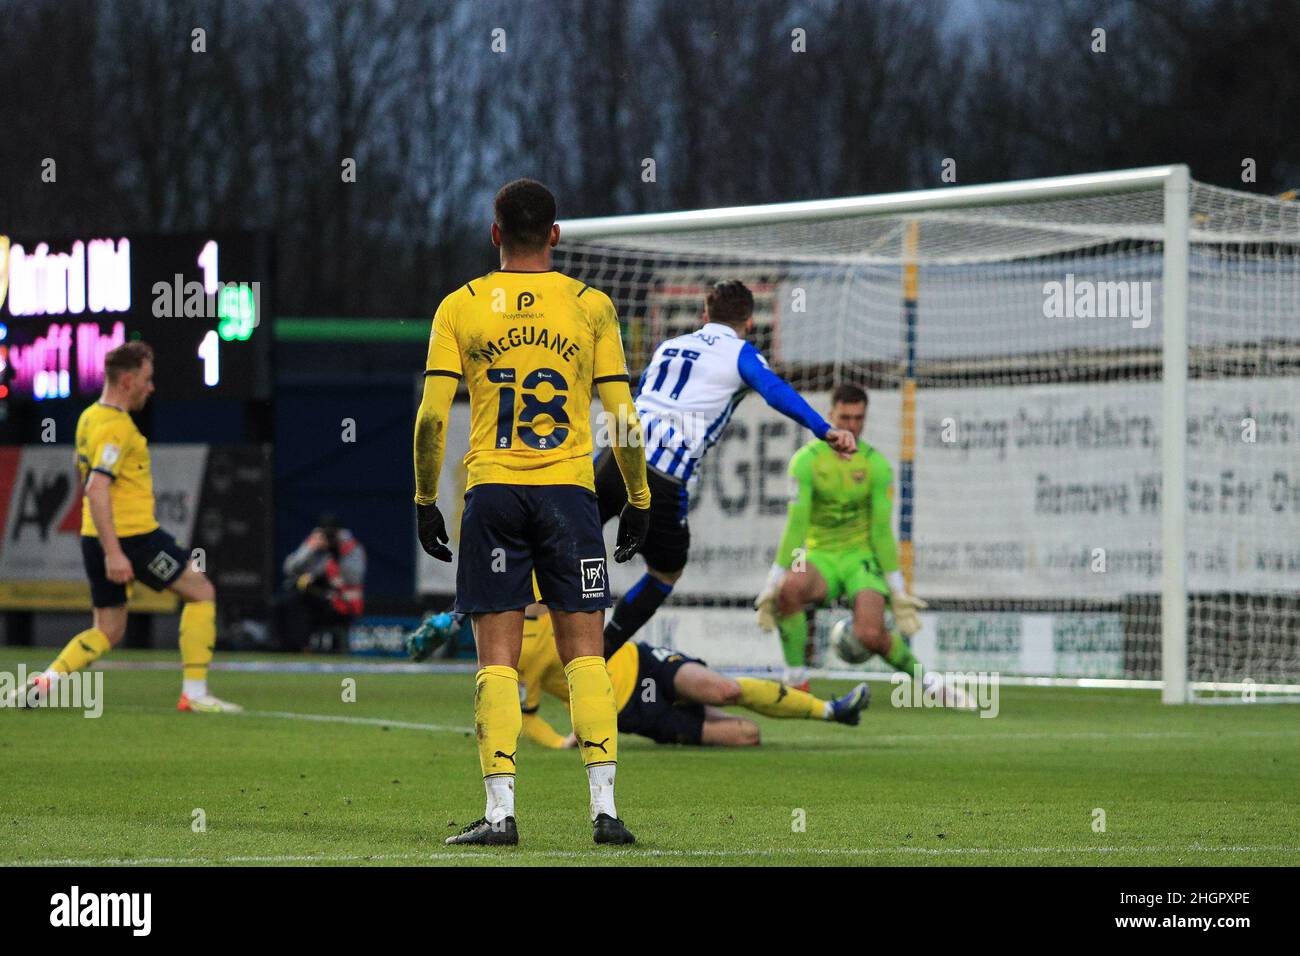 Oxford Uk 22nd Jan 22 Josh Windass 11 Of Sheffield Wednesday Puts The Ball Through The Legs Of Jack Stevens 13 Of Oxford United And Scores To Make It 1 2 In Oxford